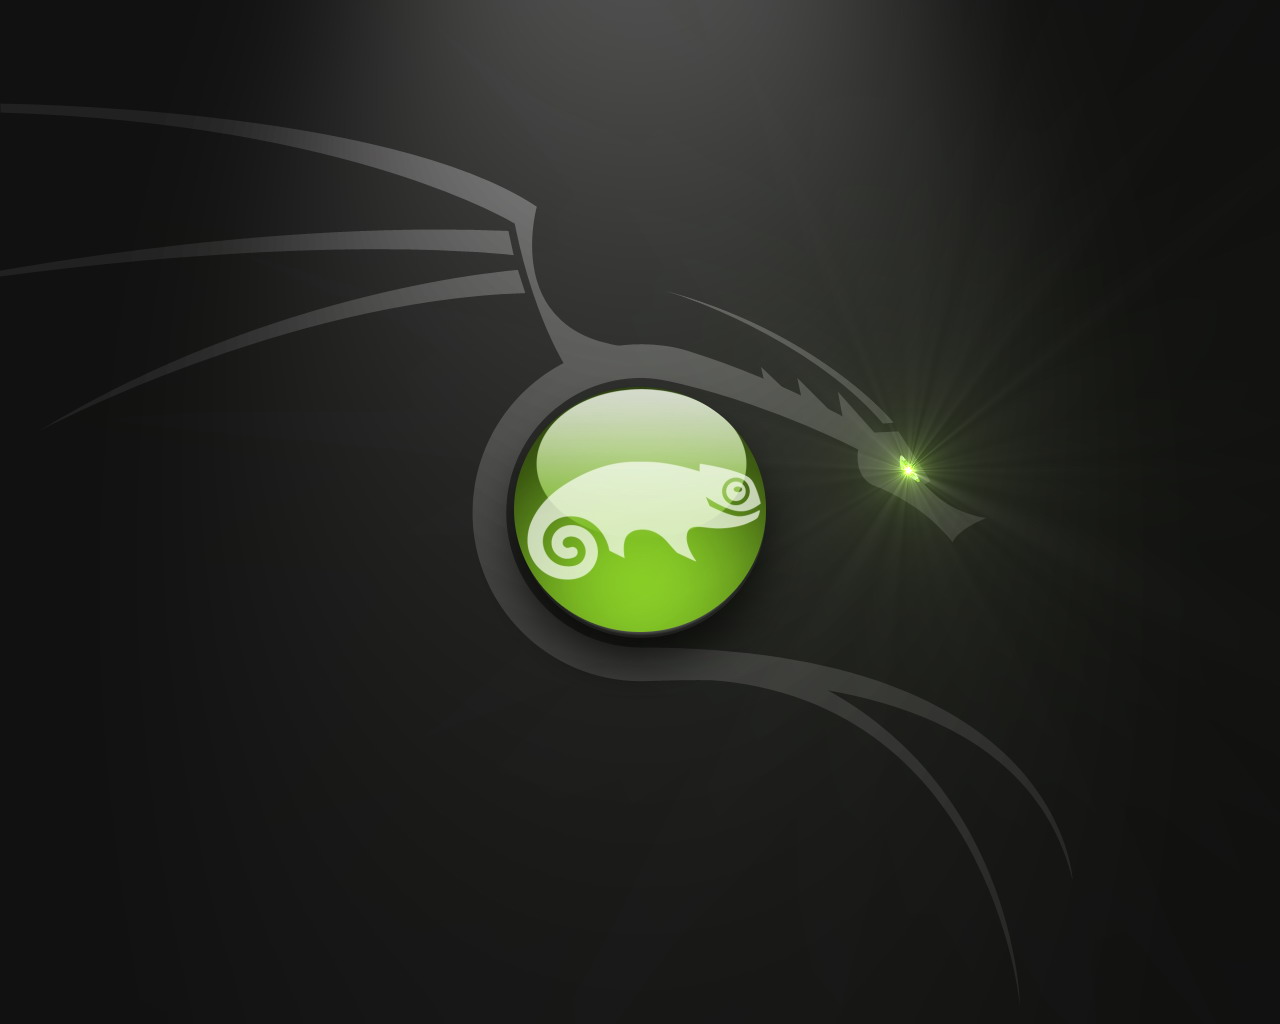 Suse Linux Stunning Wallpaper Pack The